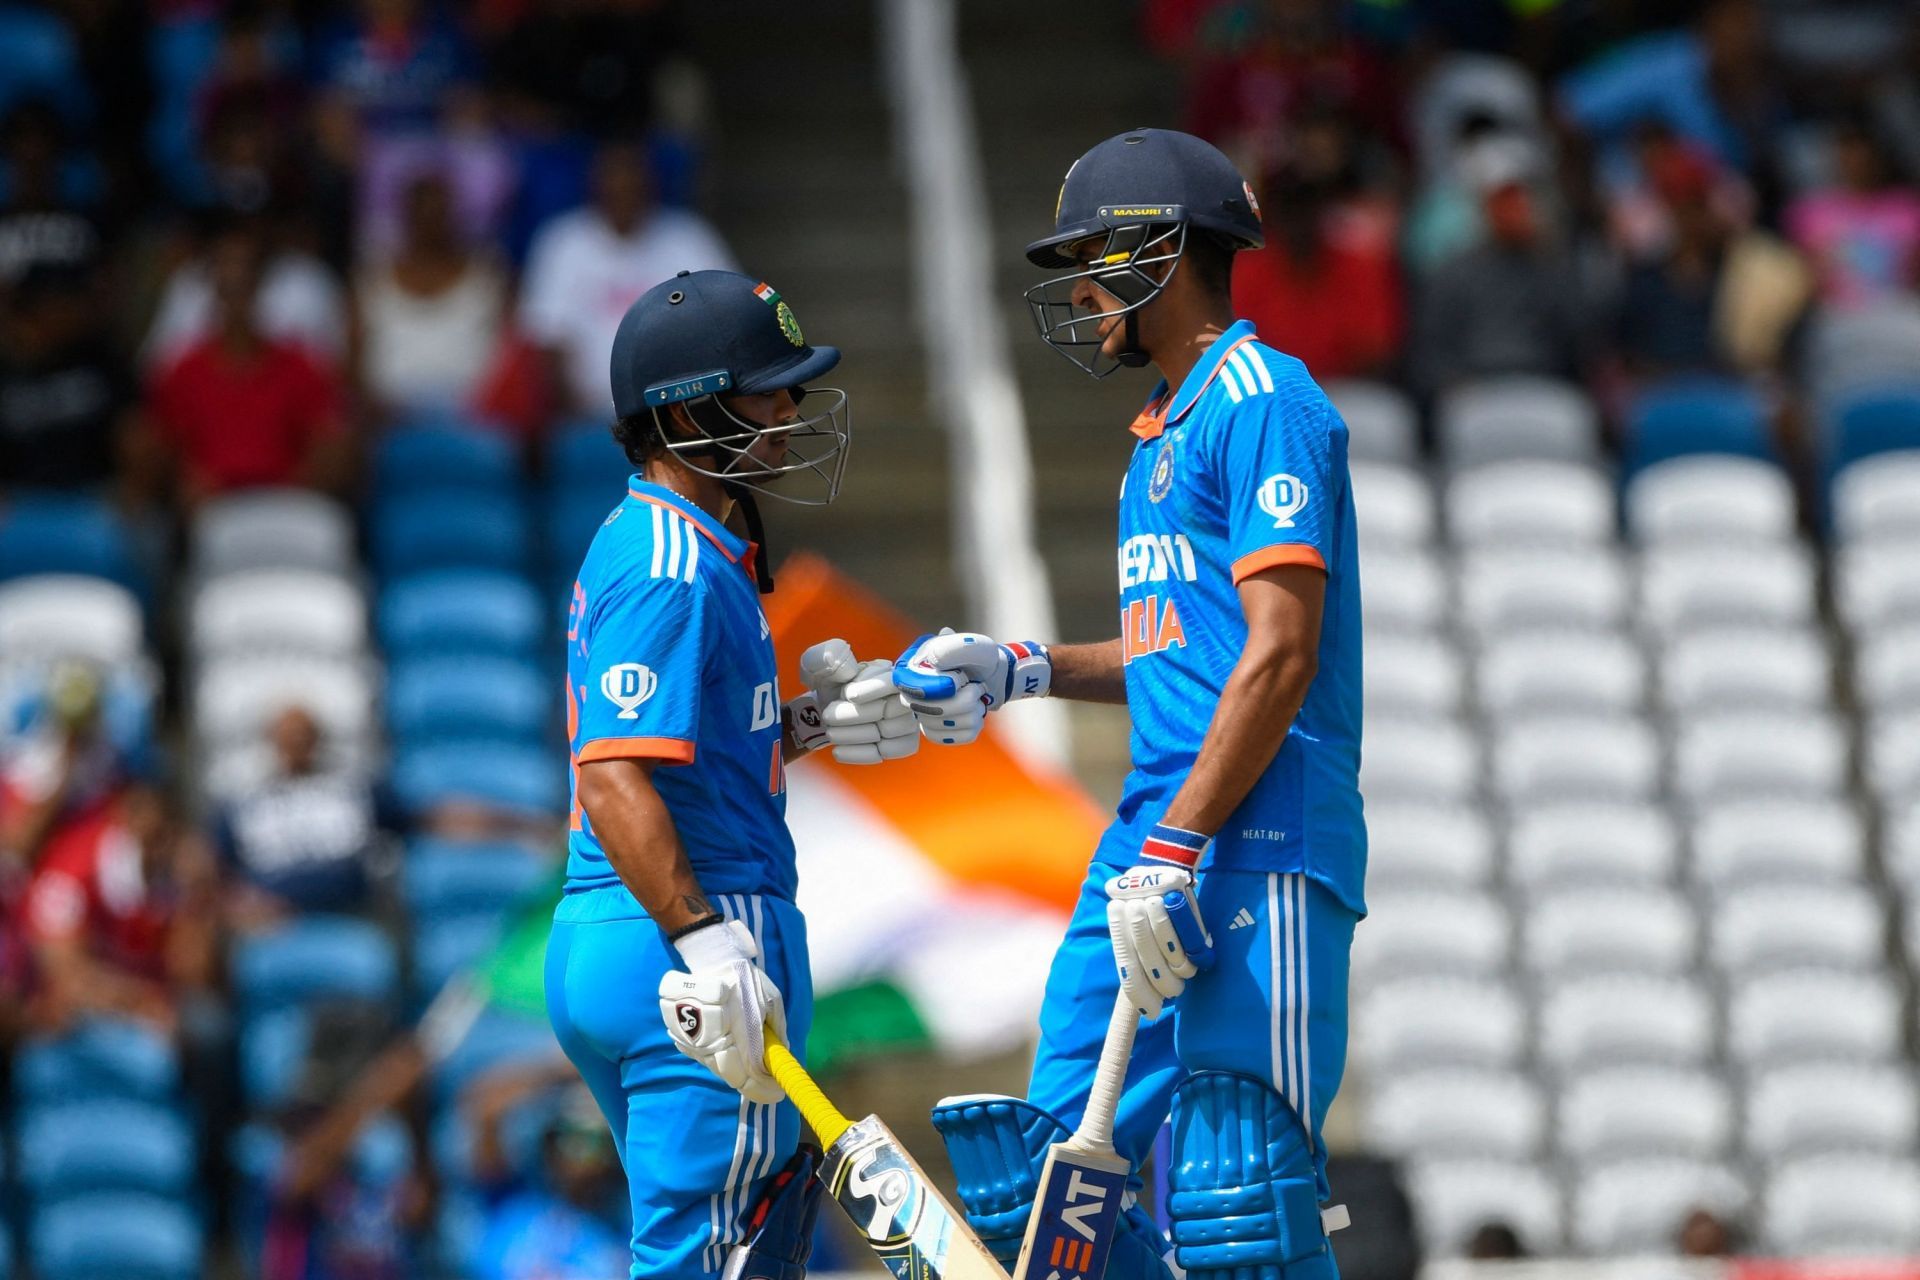 Ishan Kishan and Shubman Gill might open the batting for India. [P/C: BCCI]